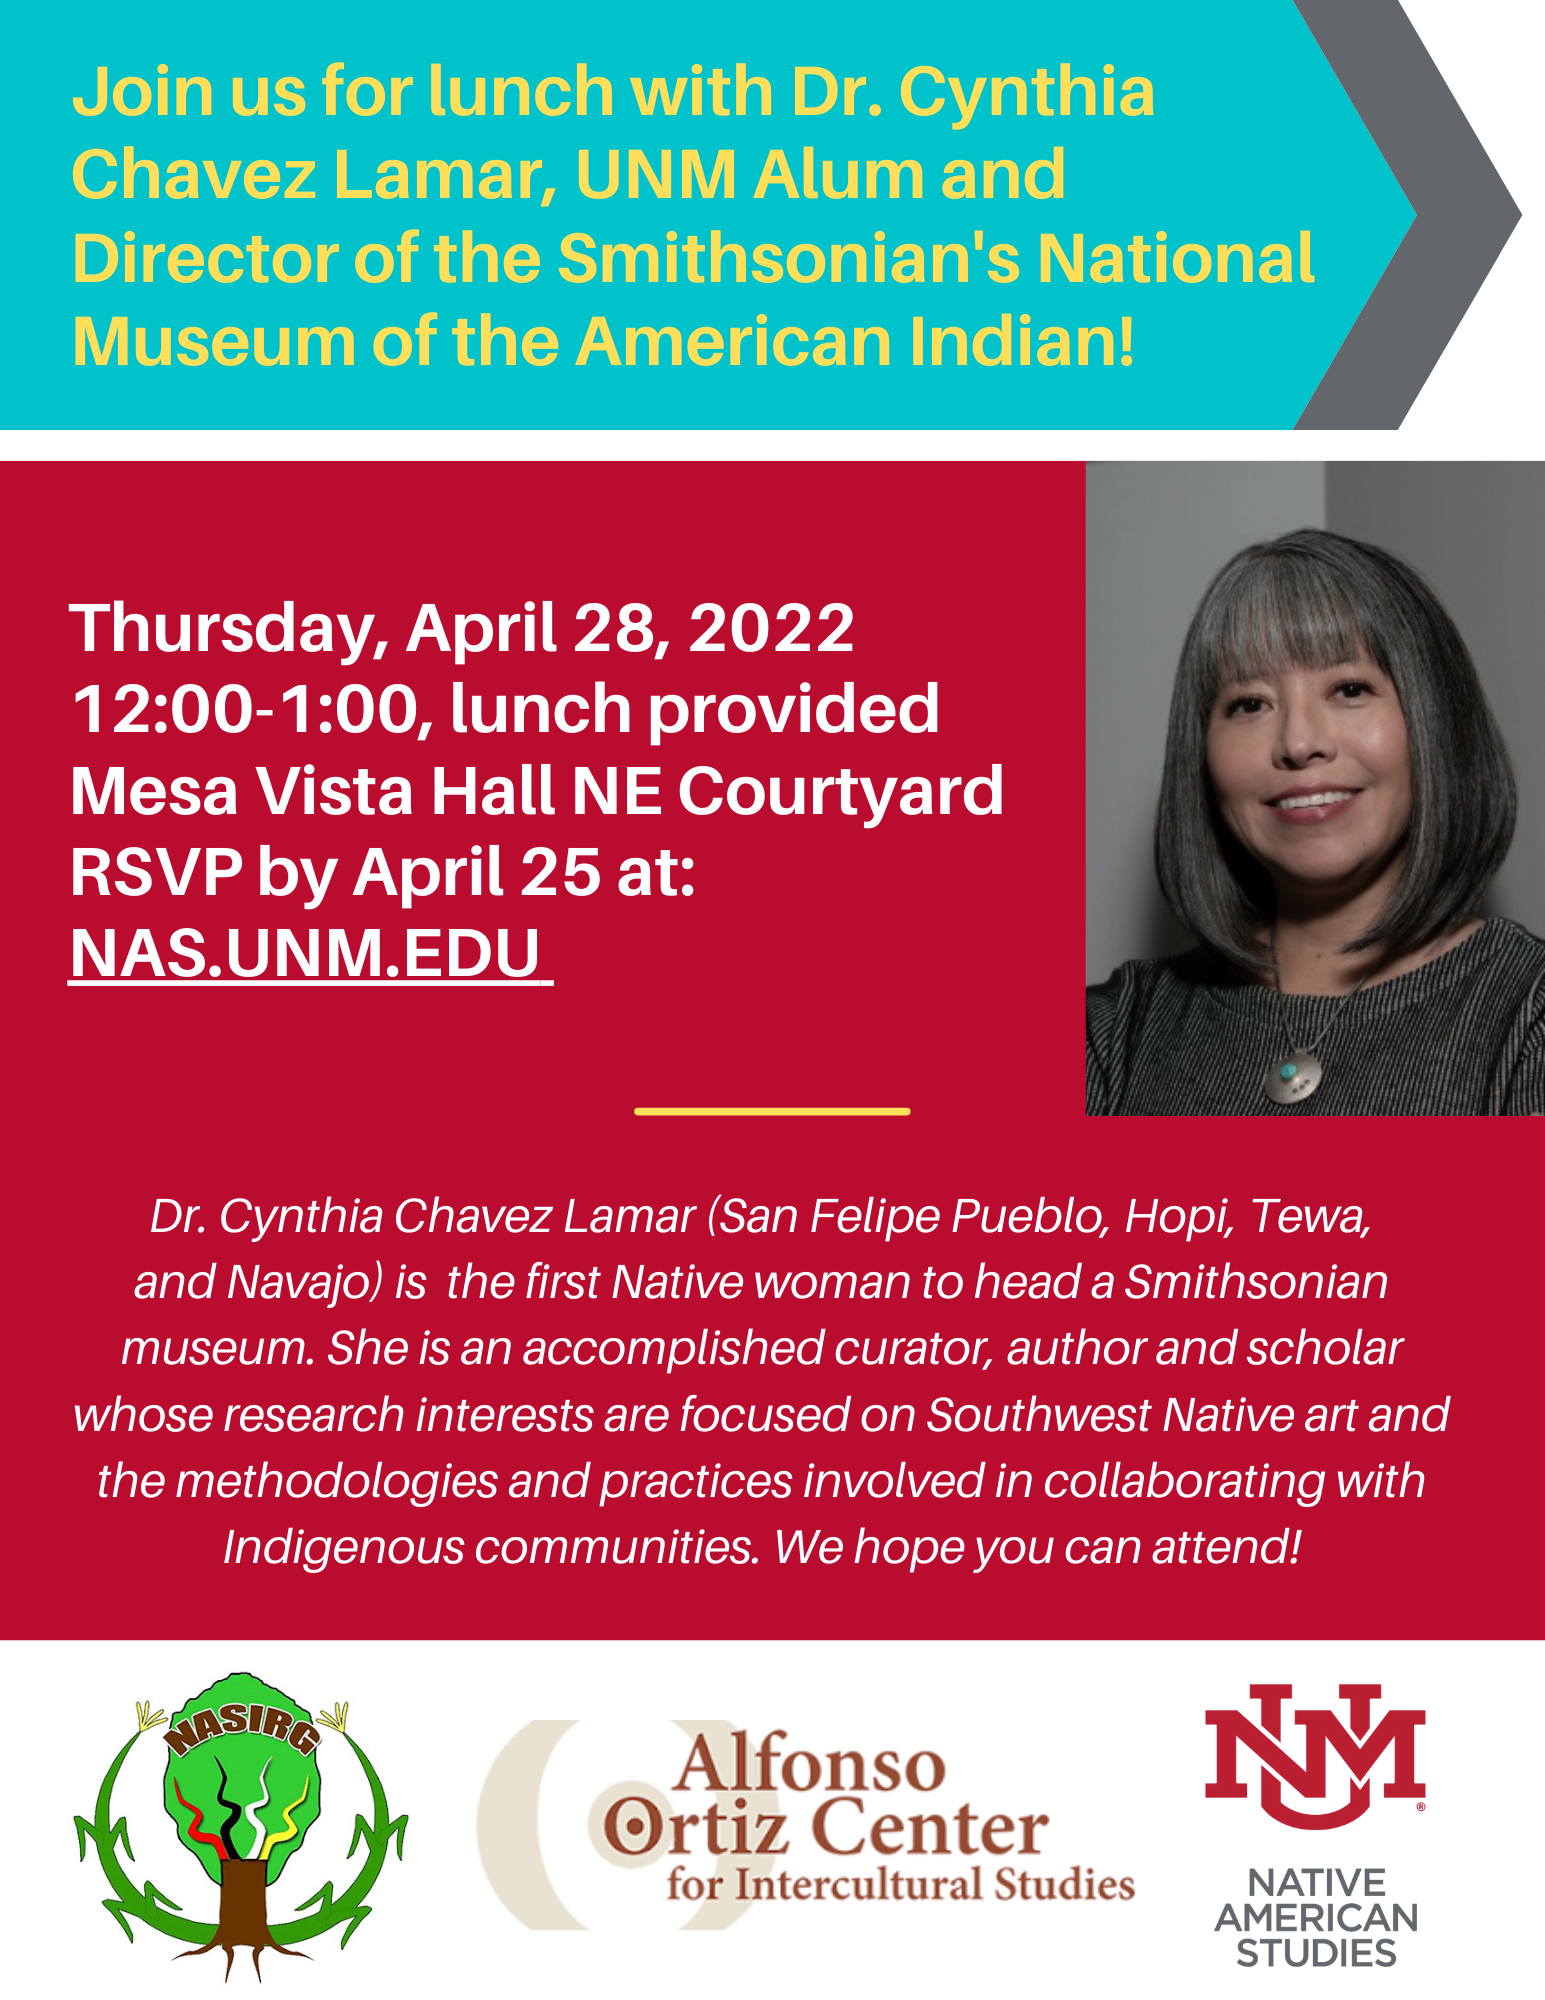 Student Lunch with Dr. Chavez Lamar [article image]